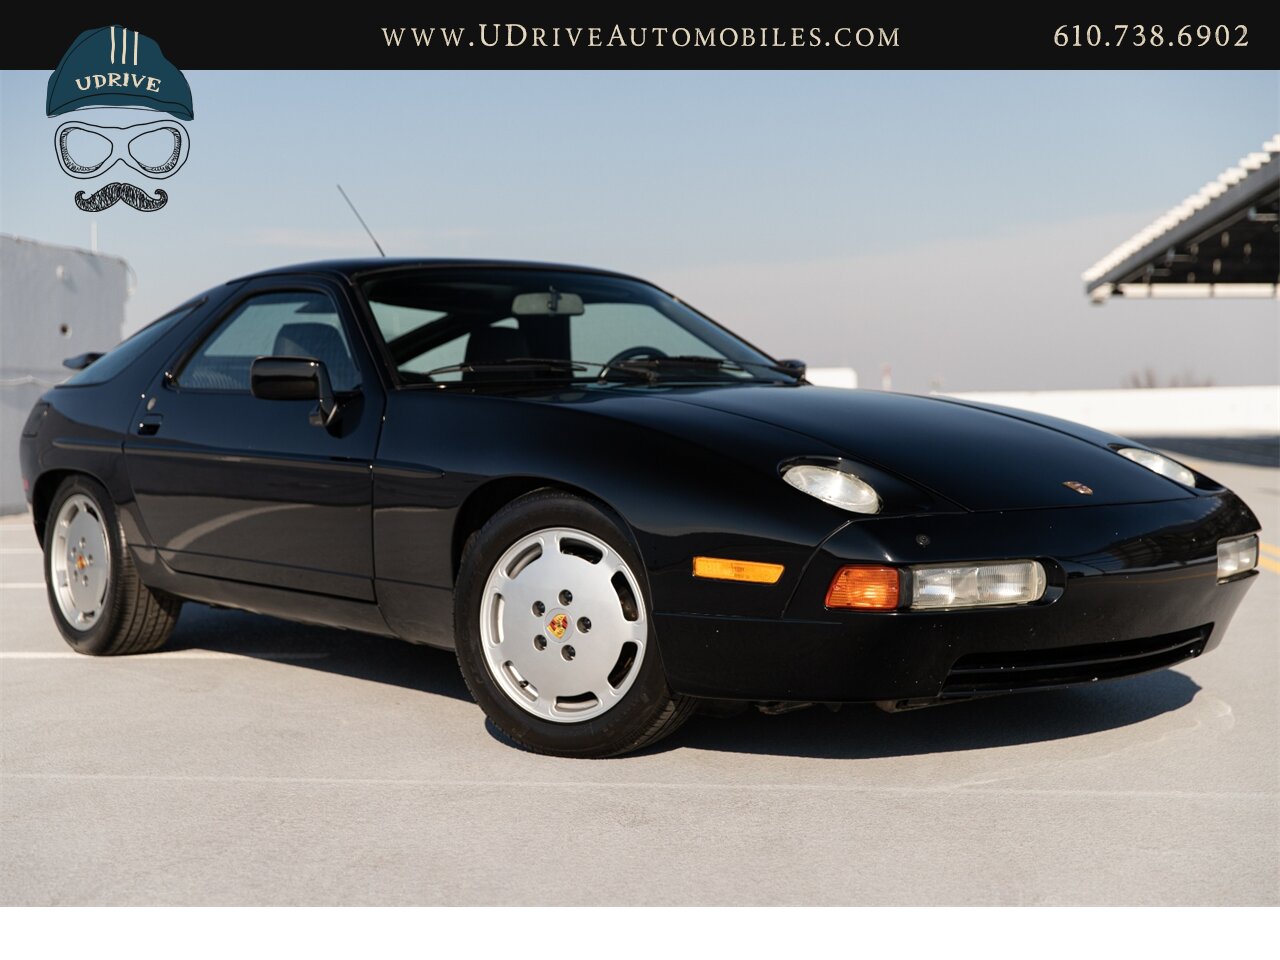 1990 Porsche 928 S4 $58k in Service History Since 2014   - Photo 3 - West Chester, PA 19382